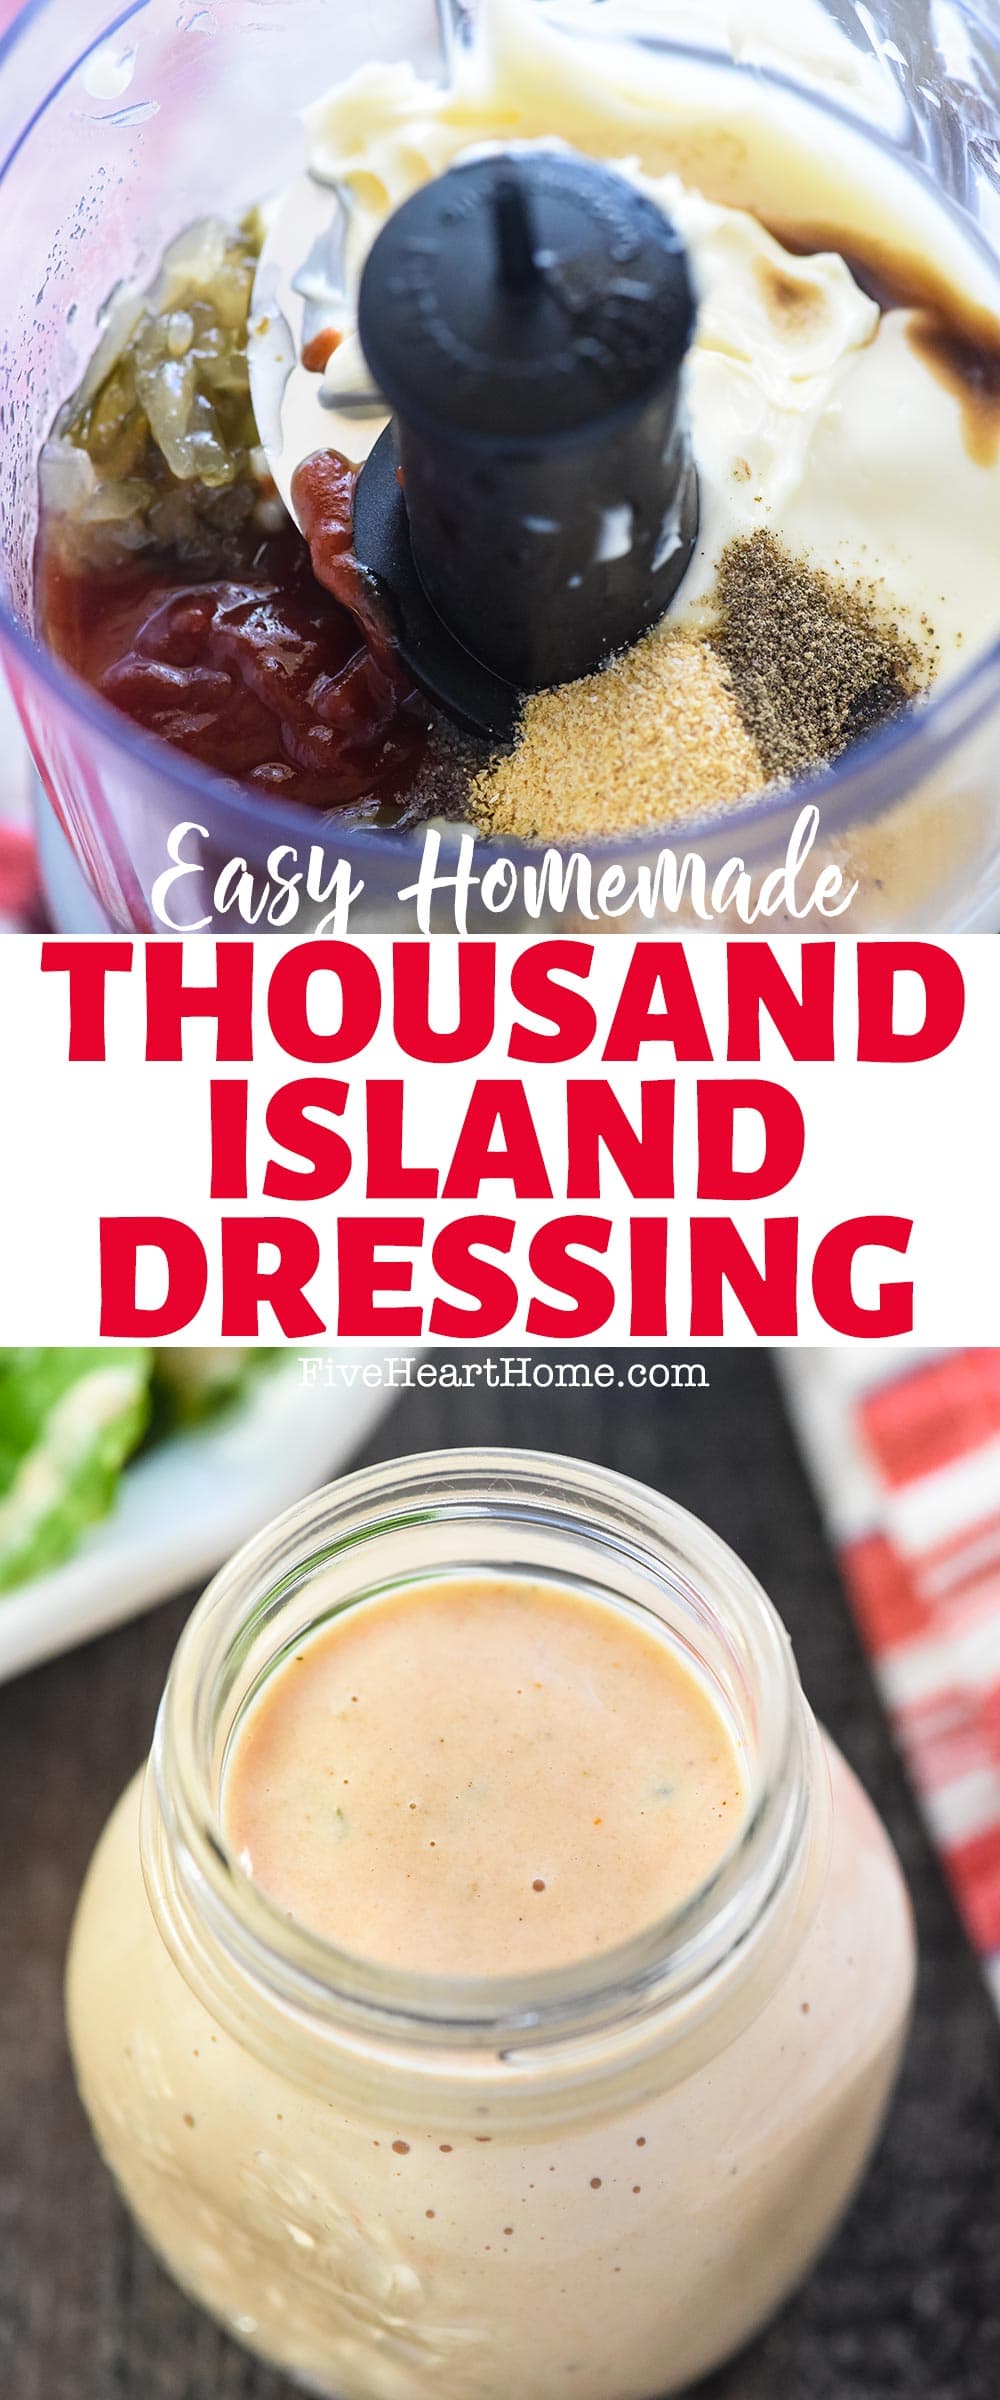 Easy Homemade Thousand Island Dressing ~ this thick, creamy, zesty salad dressing is quick and easy to make using just a few basic ingredients…and it’s perfect for jazzing up your favorite salads and sandwiches! | FiveHeartHome.com via @fivehearthome